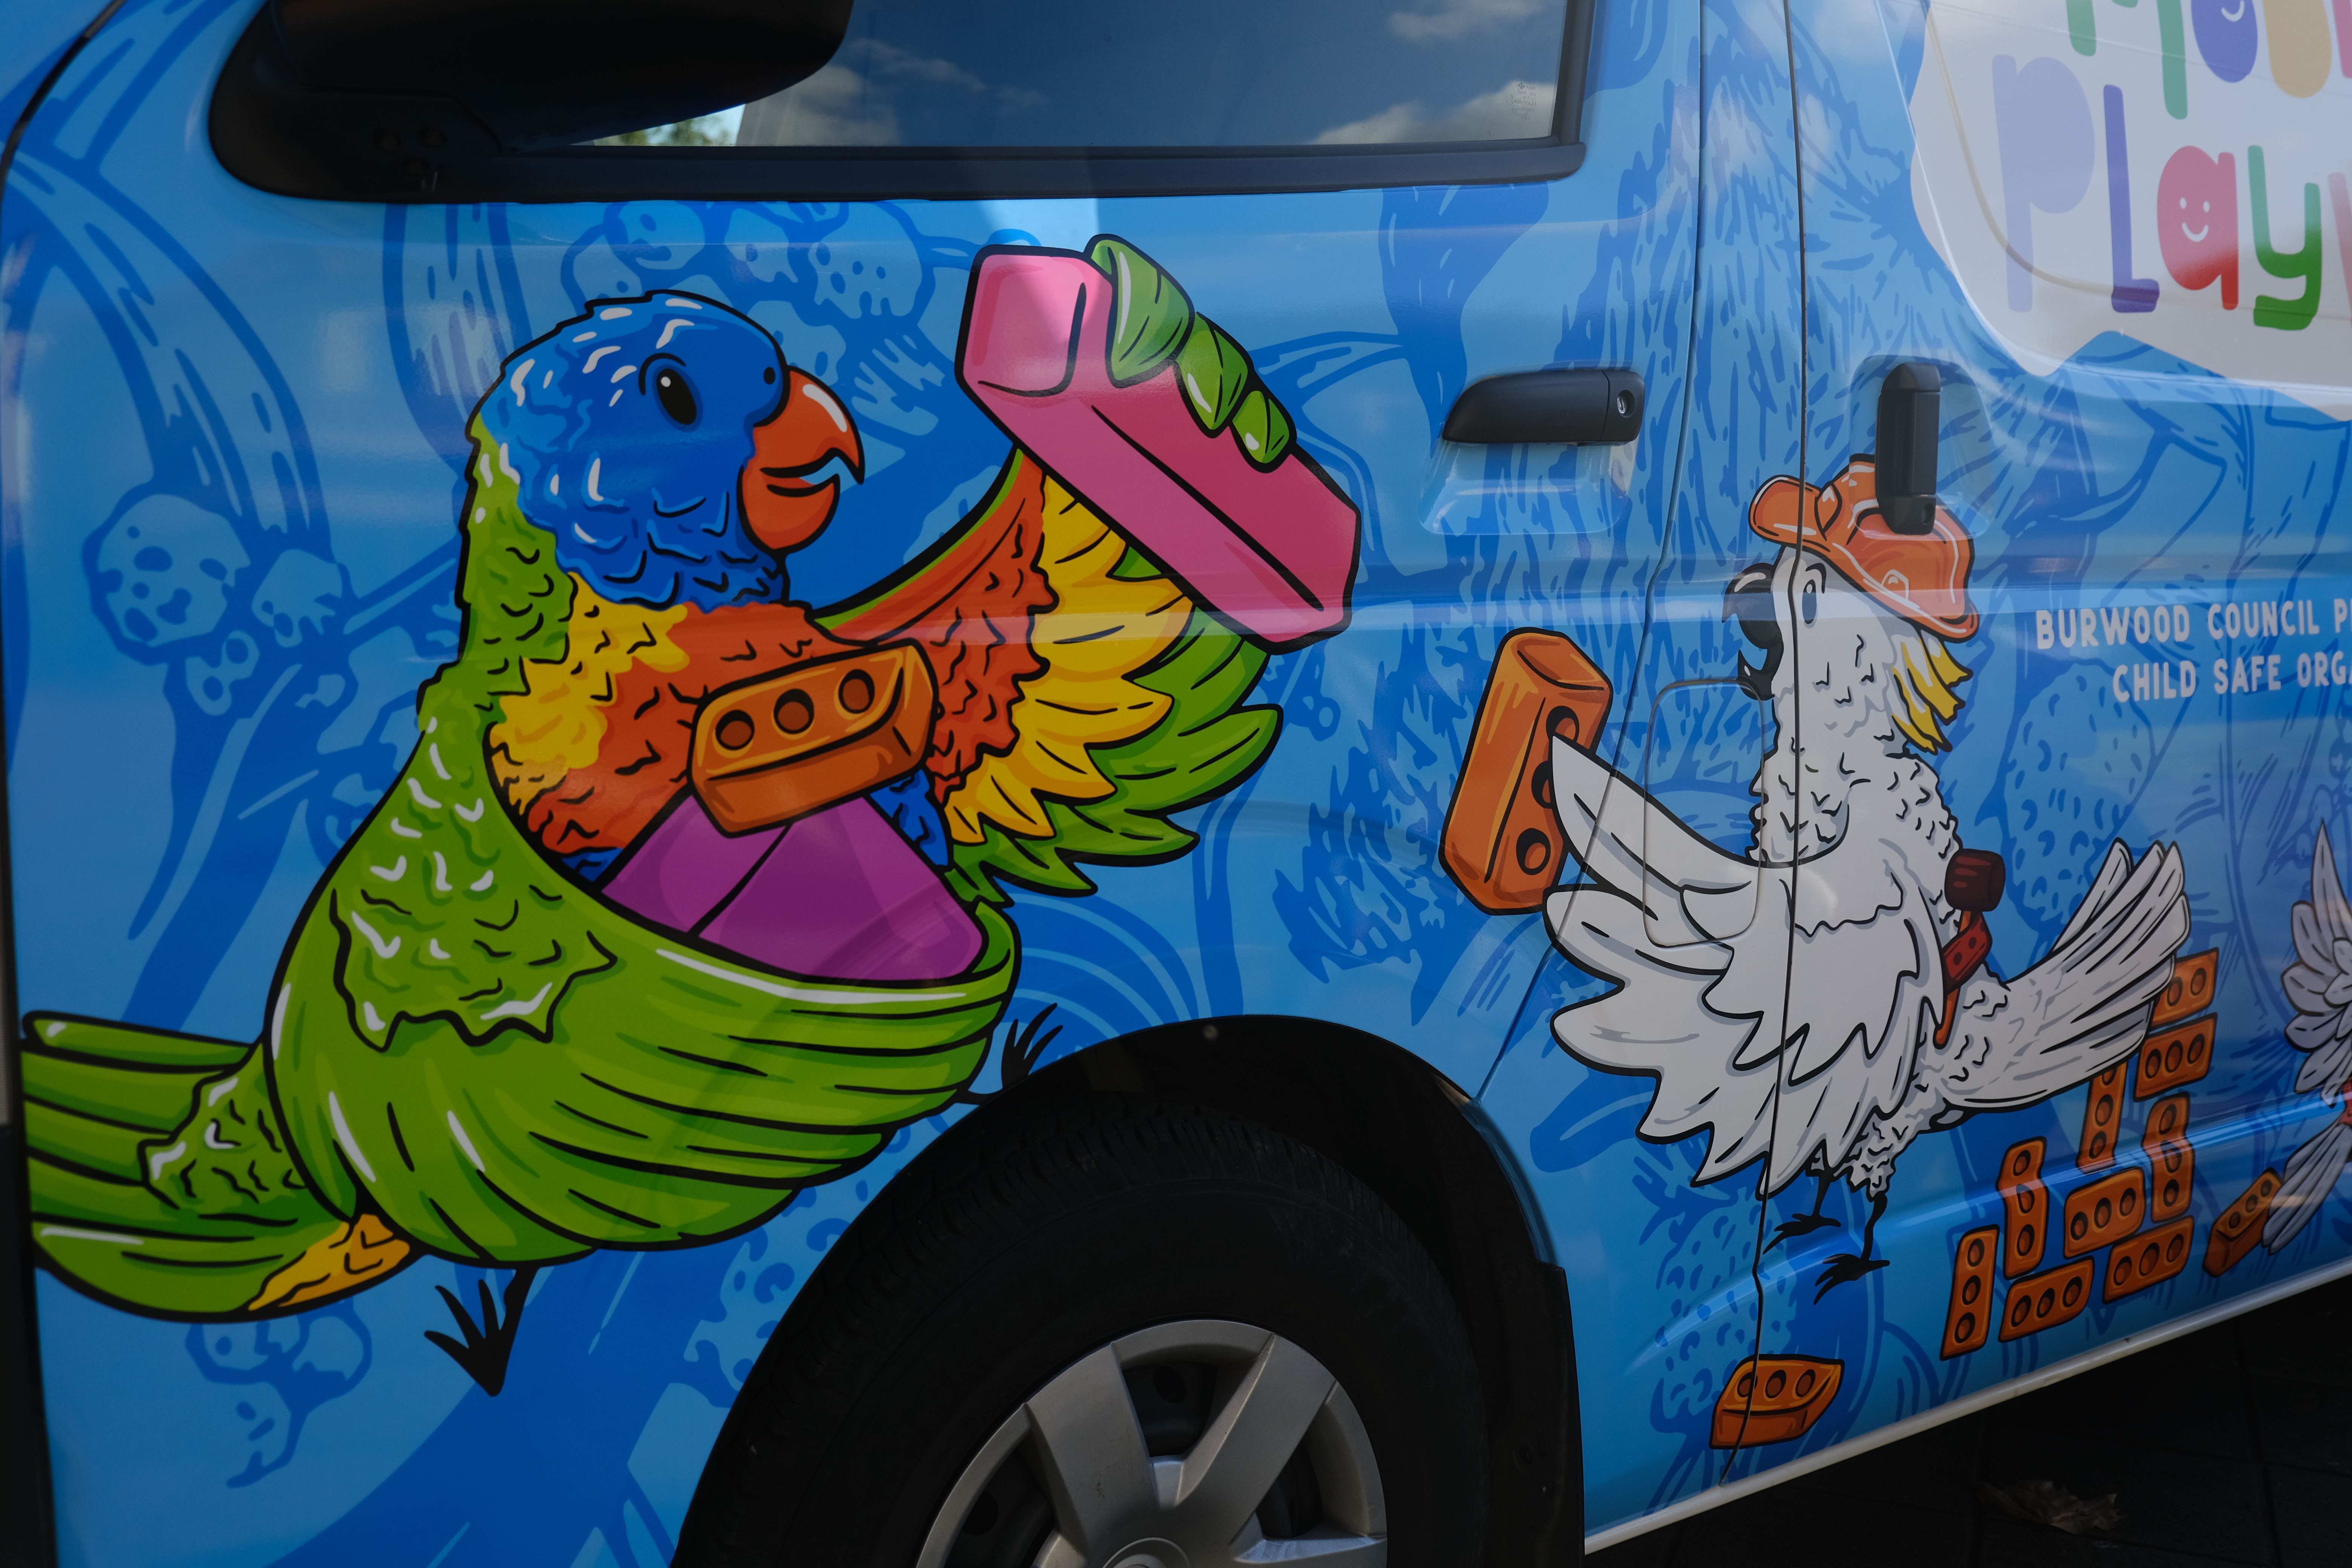 A close up look at colourful Australian animal themed illustrations on a van